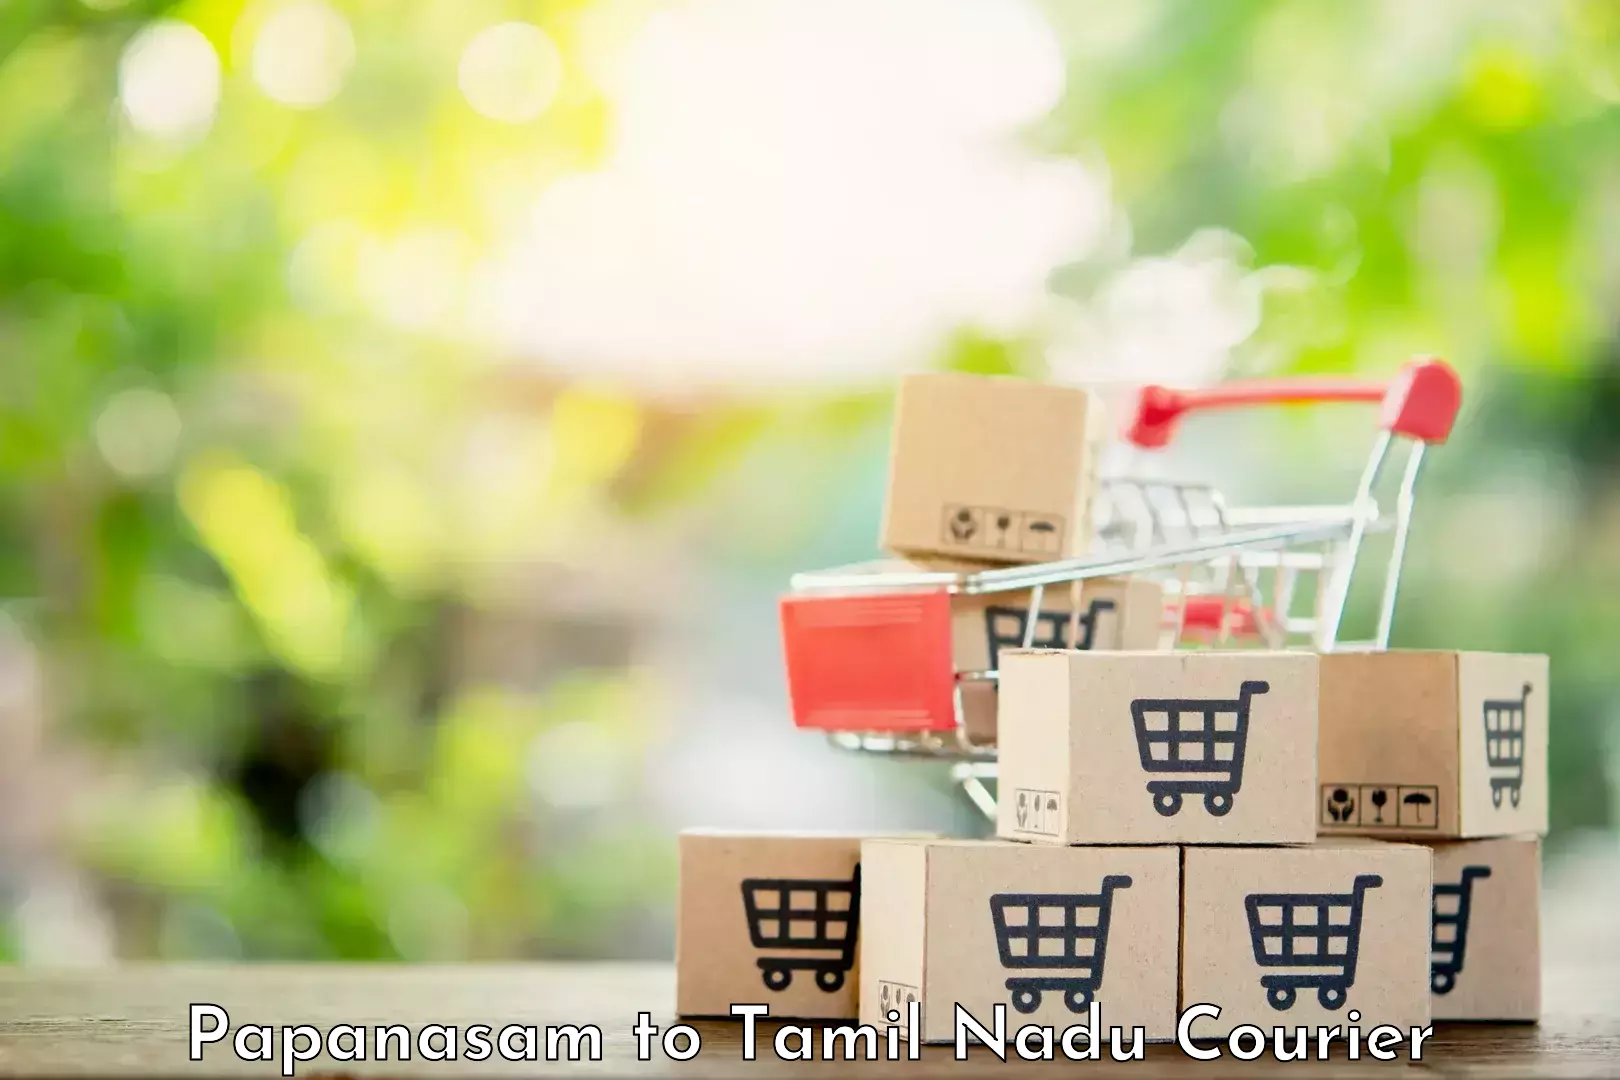 24-hour delivery options Papanasam to Tenkasi